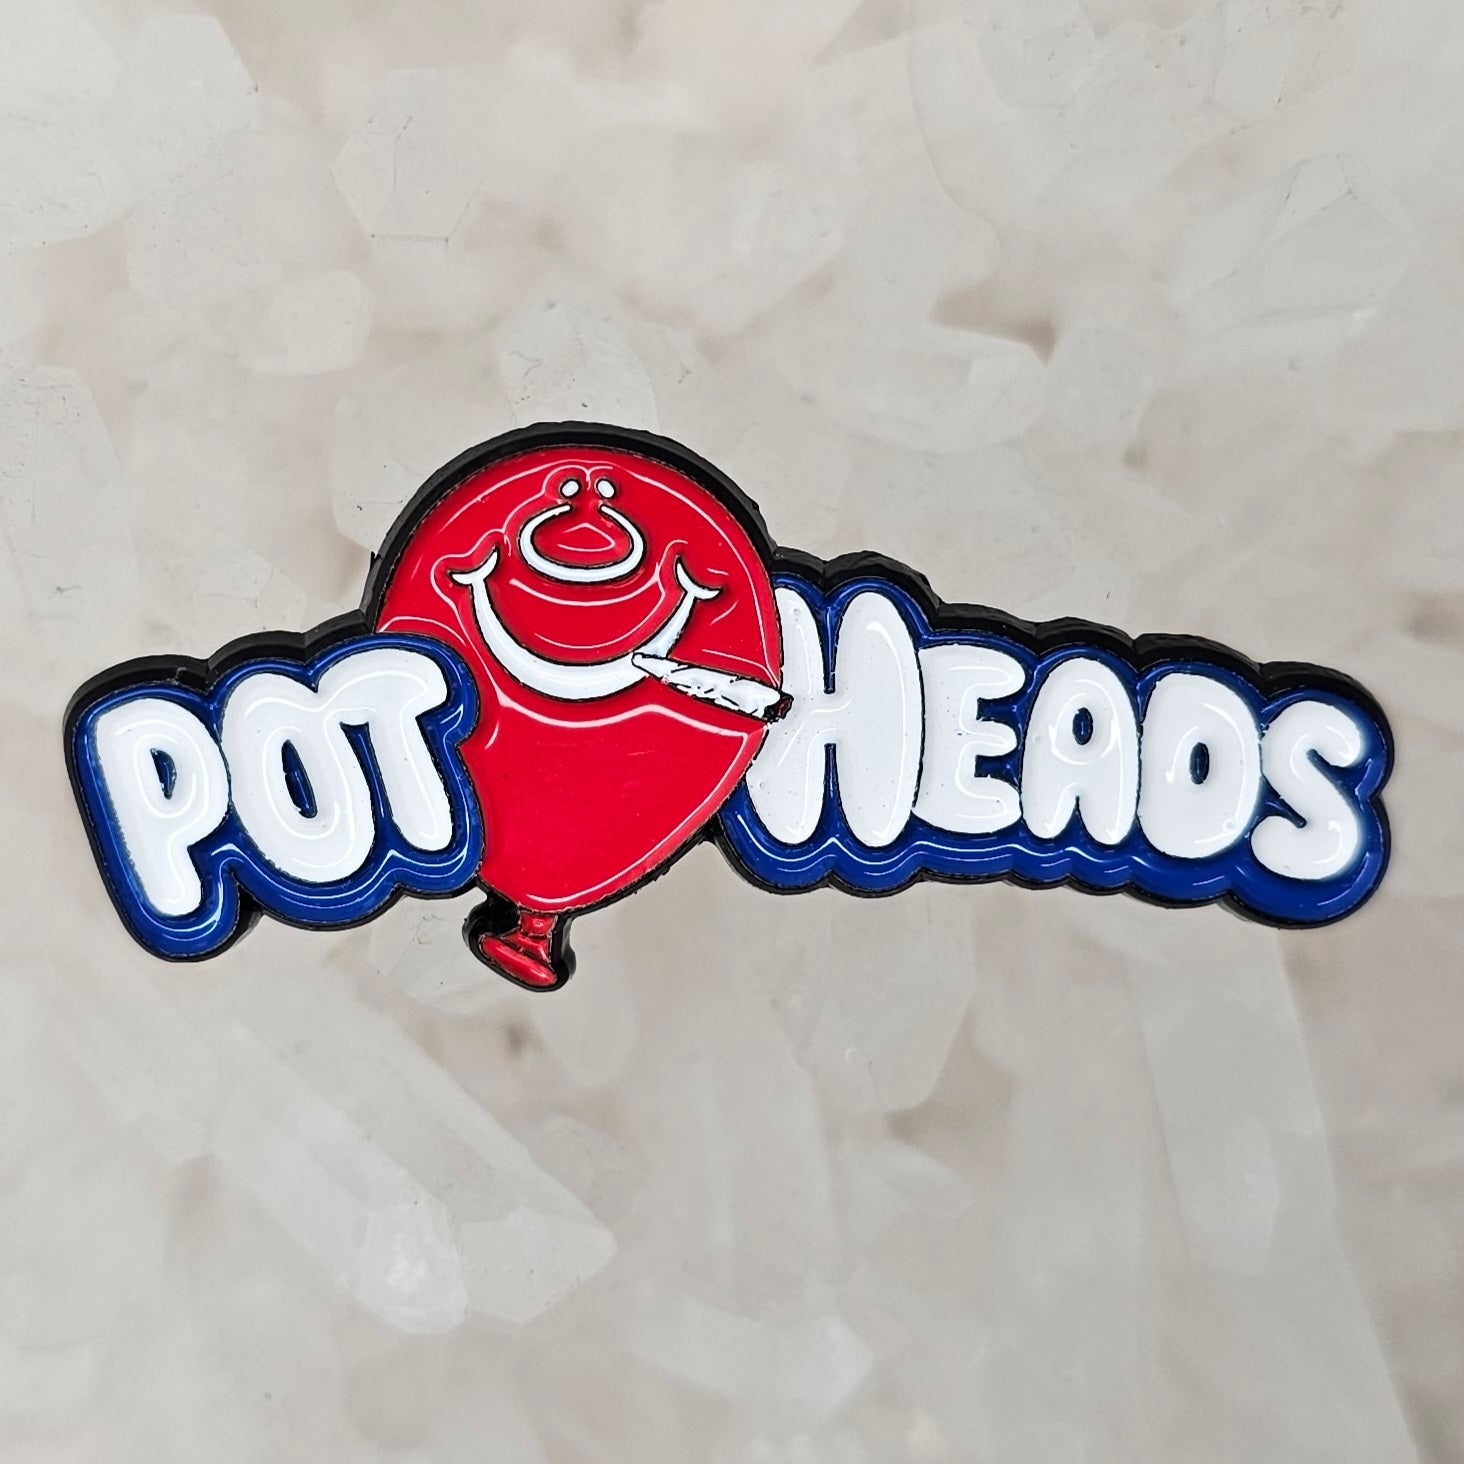 Pot Heads Psychedelic Candy Air Head Weed Enamel Pins Hat Pins Lapel Pin Brooch Badge Festival Pin